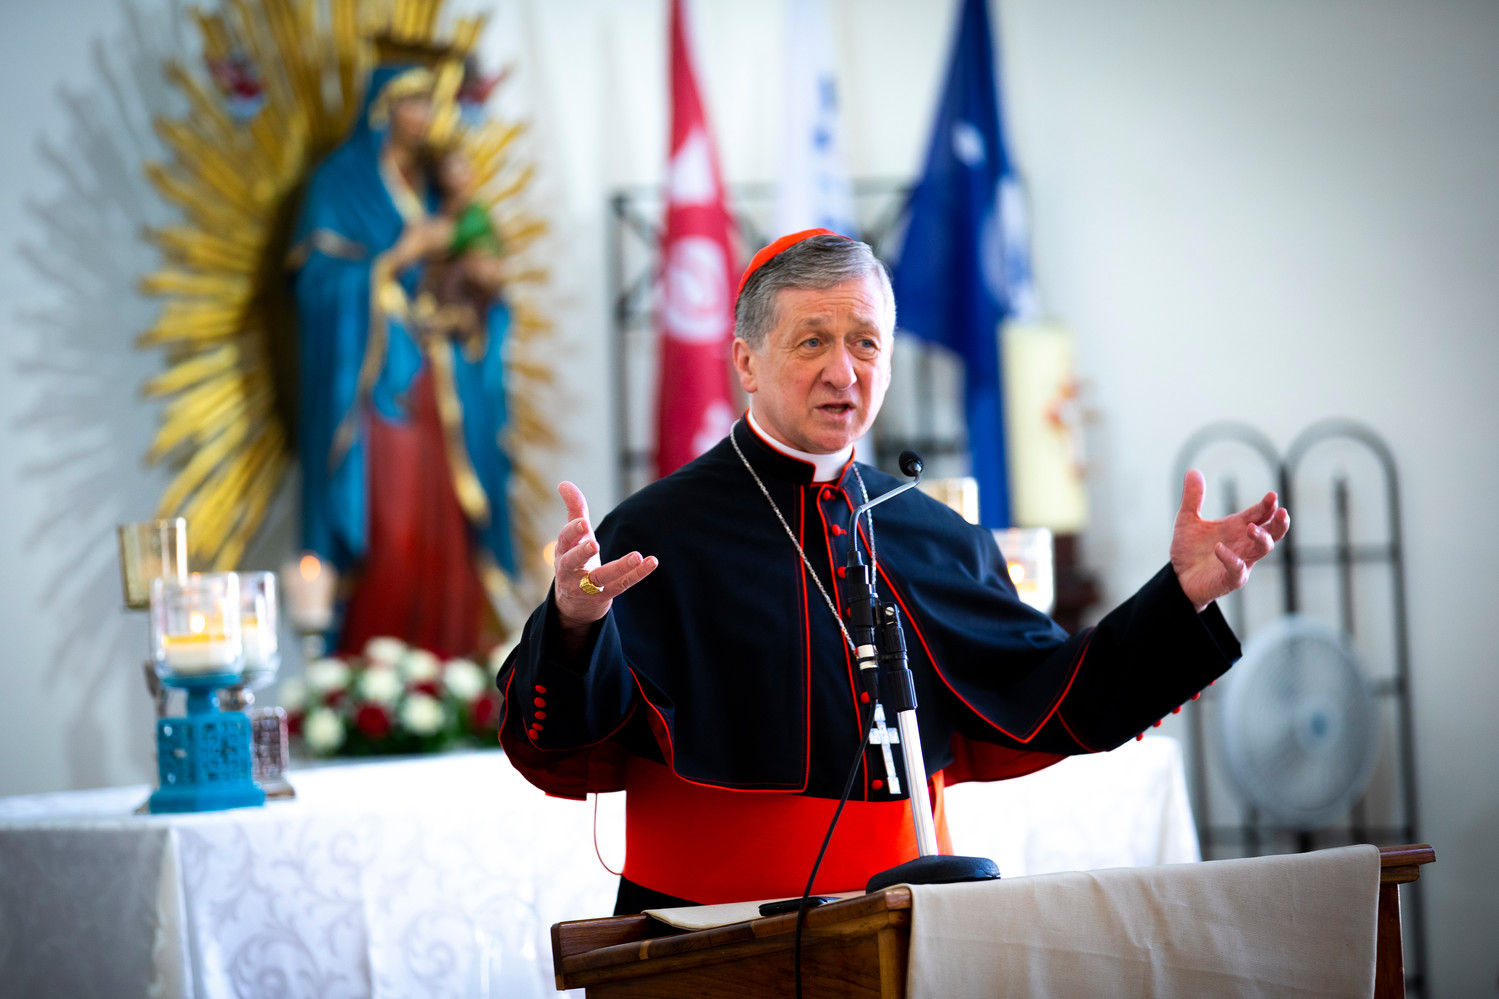 Chicago Cardinal Blase J. Cupich leads a catechesis session for World Youth Day pilgrims at the Parish of Our Mother of Perpetual Help in Panama City Jan. 25, 2019.